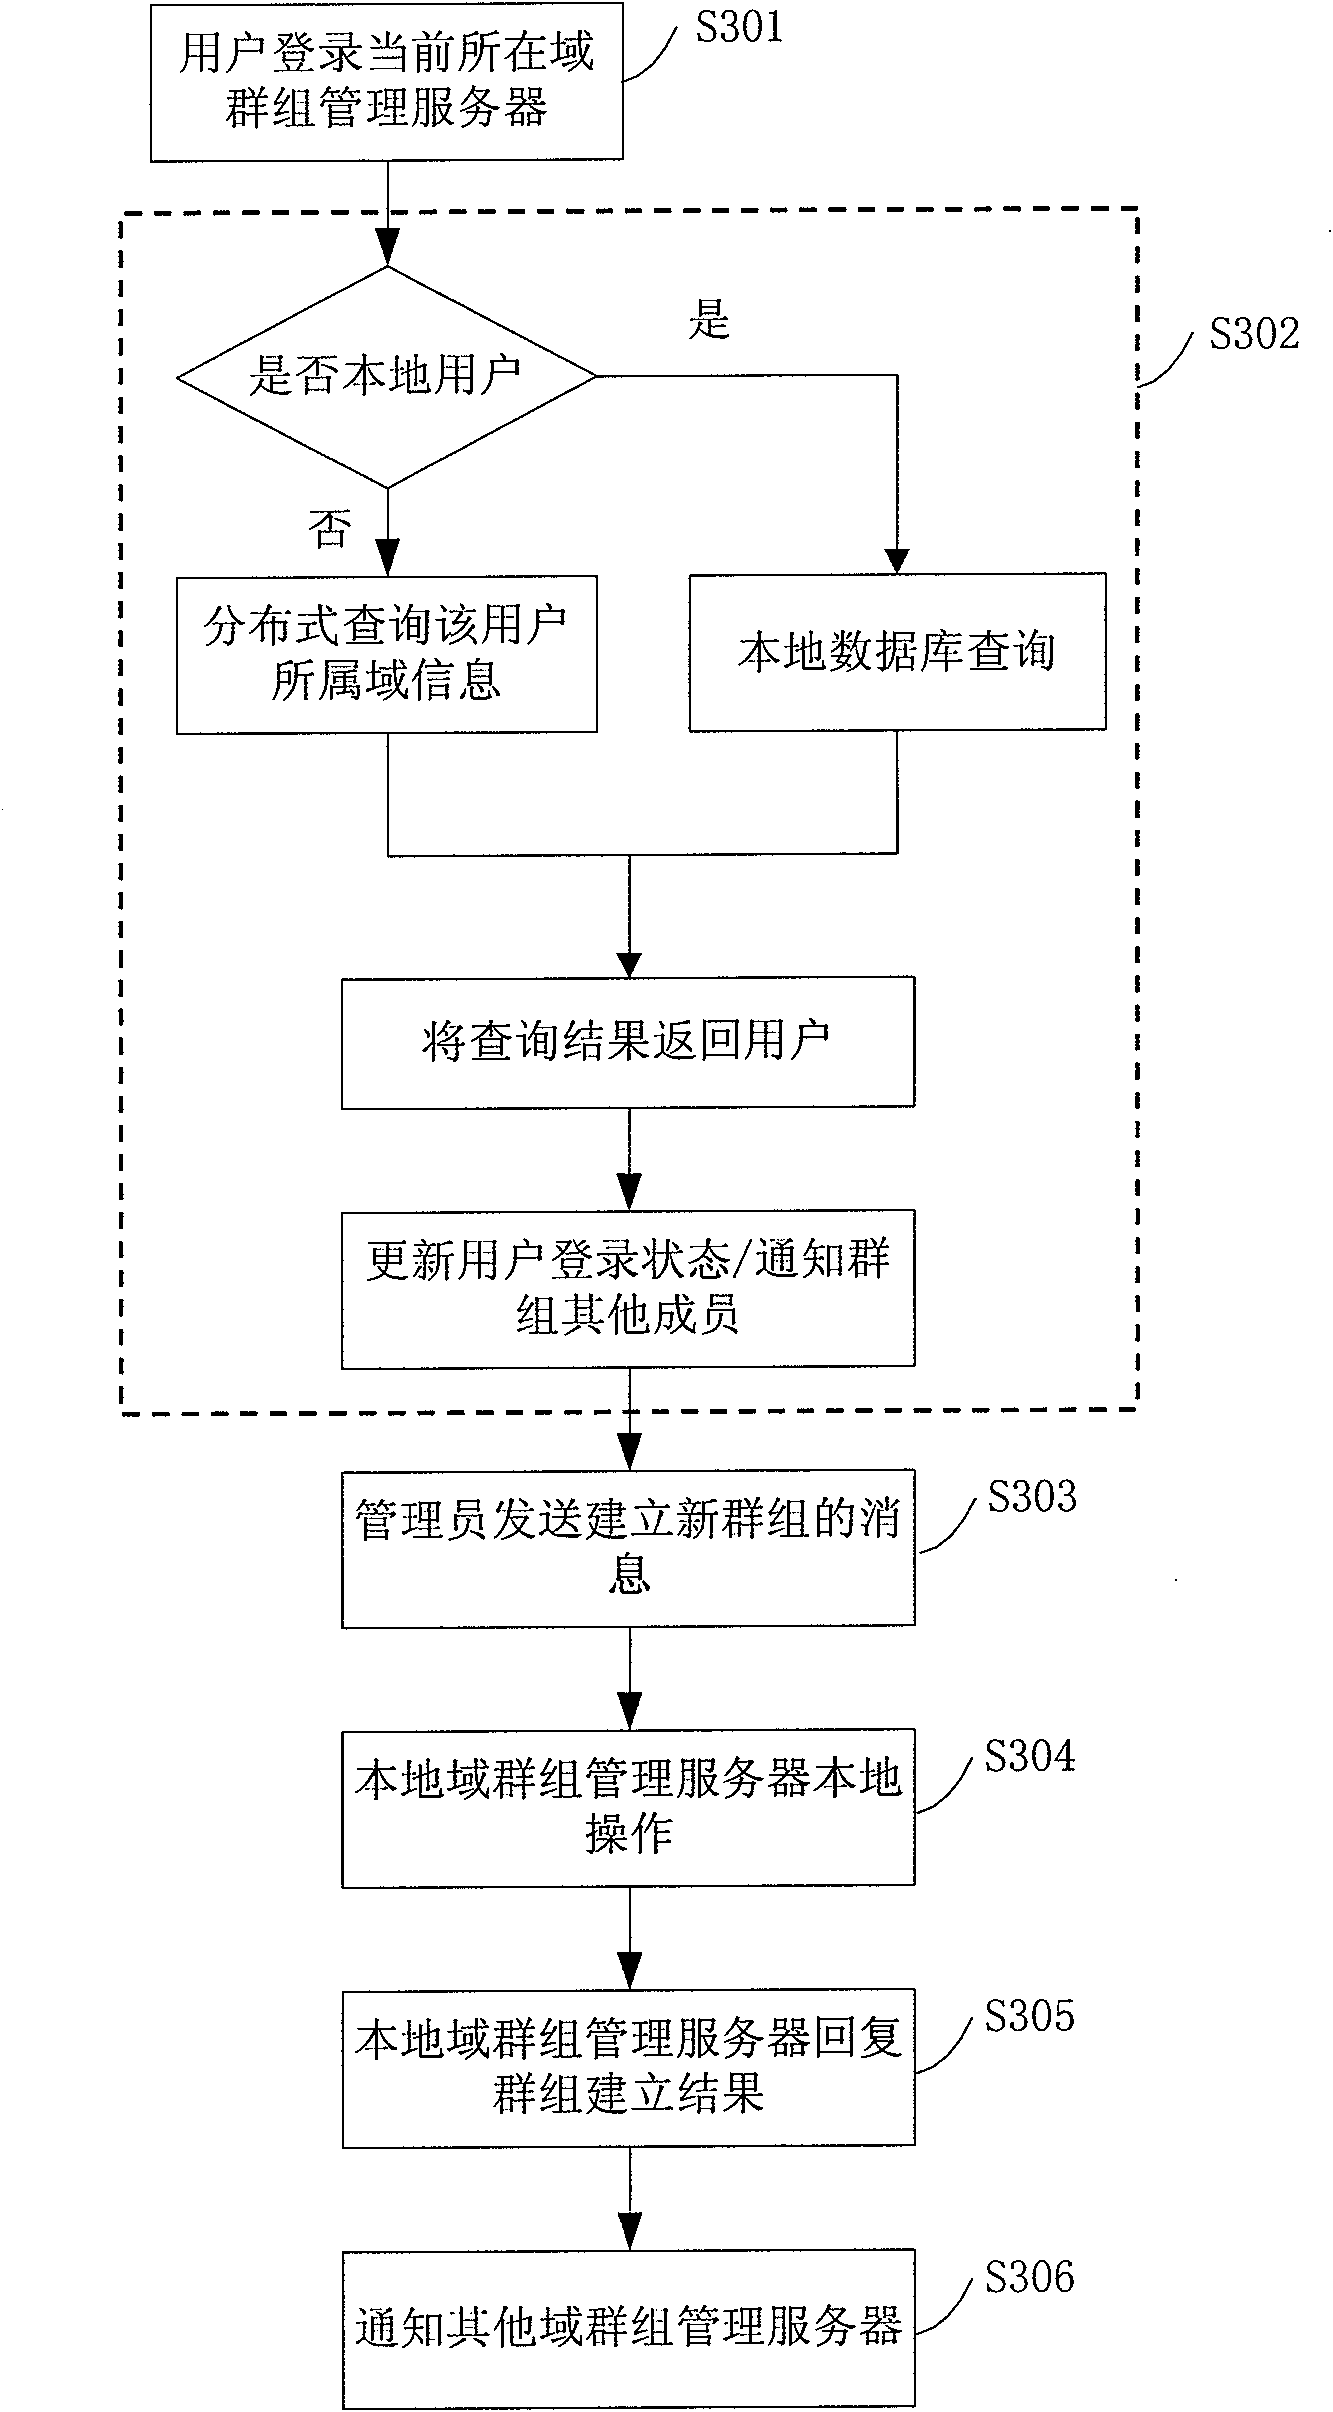 Group creating and member adding method in distributed domain management system